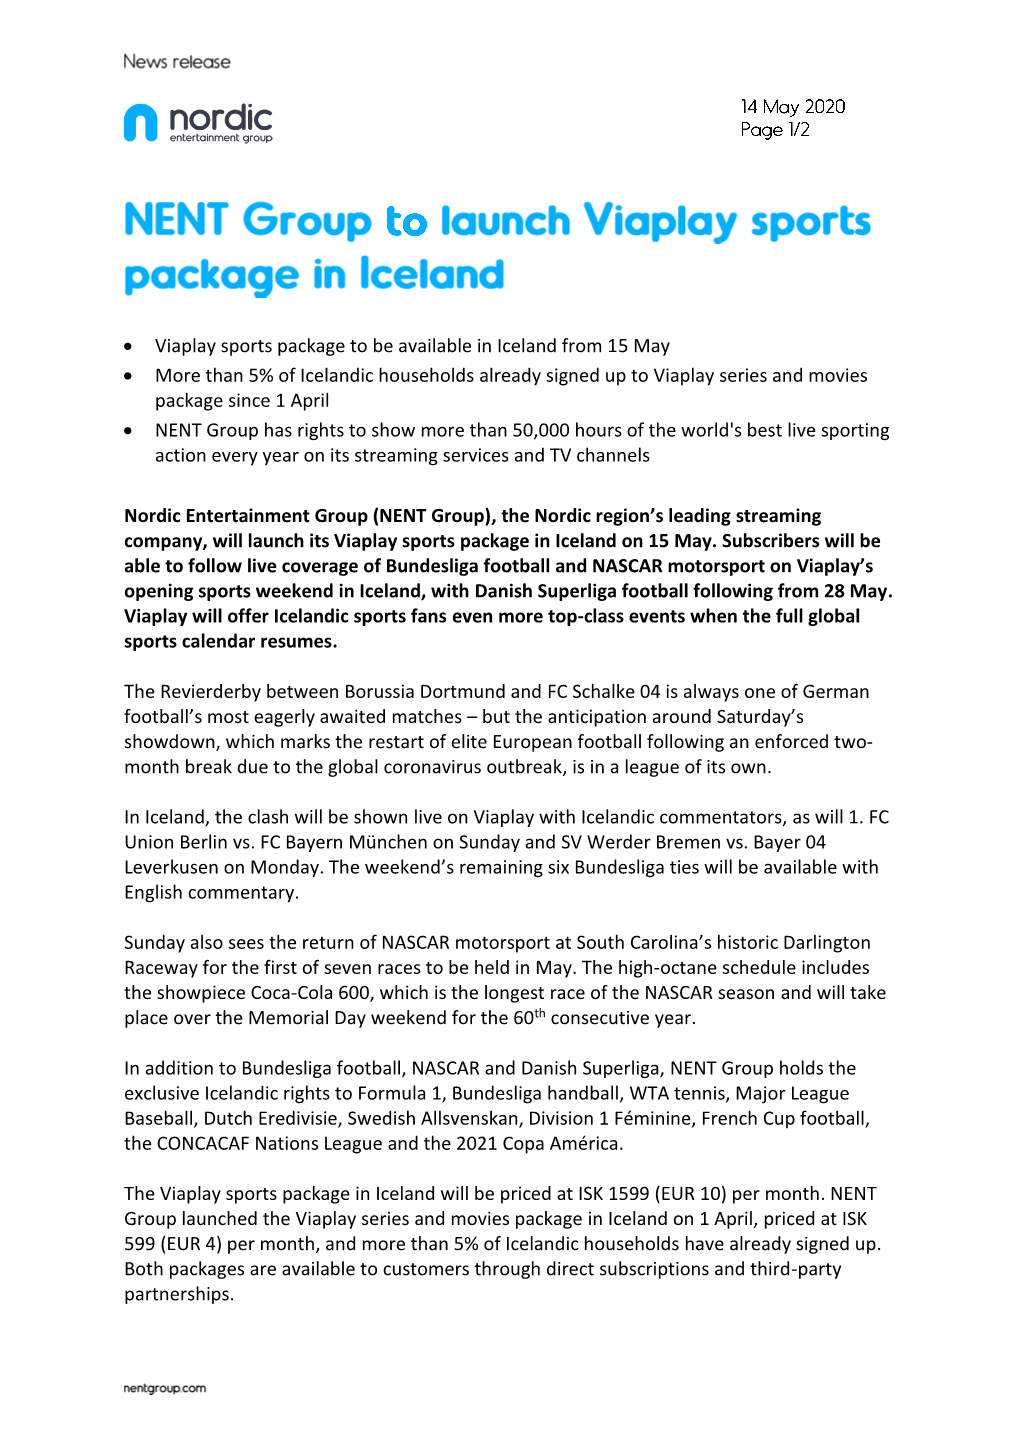 Viaplay Sports Package to Be Available in Iceland from 15 May • More Than 5% of Icelandic Households Already Signed up To